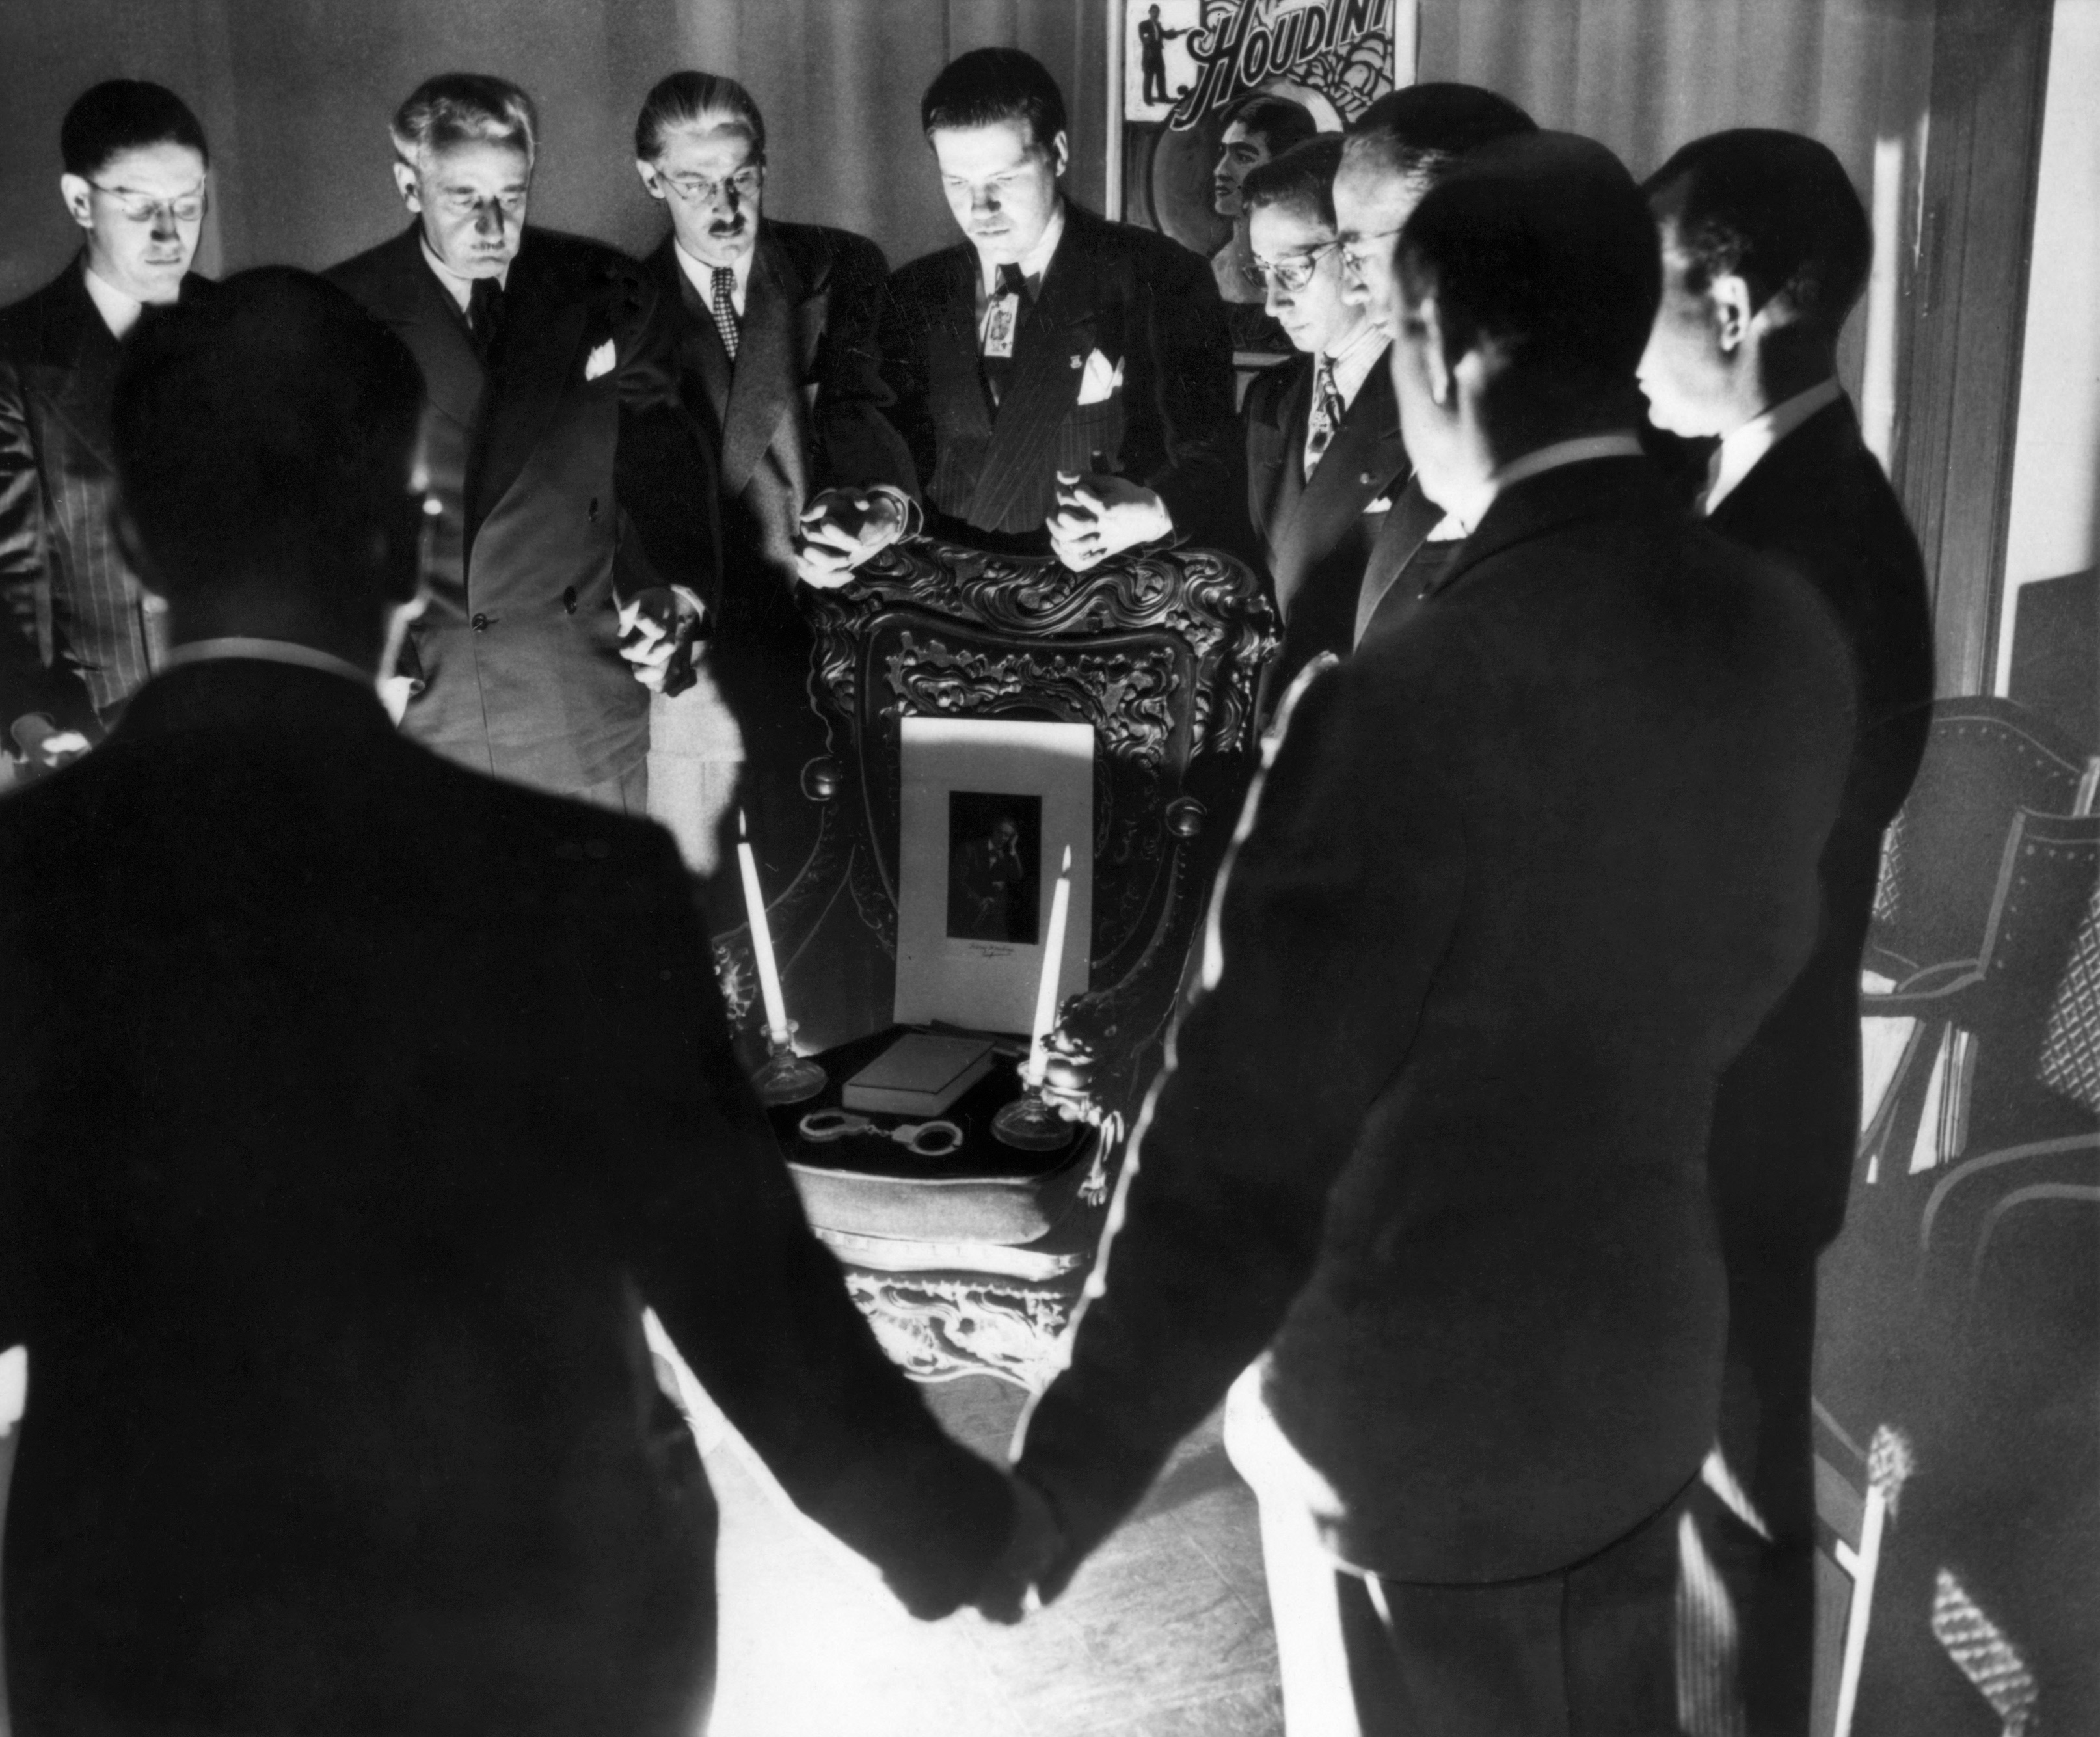 Houdini Seance, 1936. A Group Of Magicians Conducting A Seance In Detroit, Michigan, In An Attempt To Contact The Spirit Of Harry Houdini. Photograph, 31 October 1936.